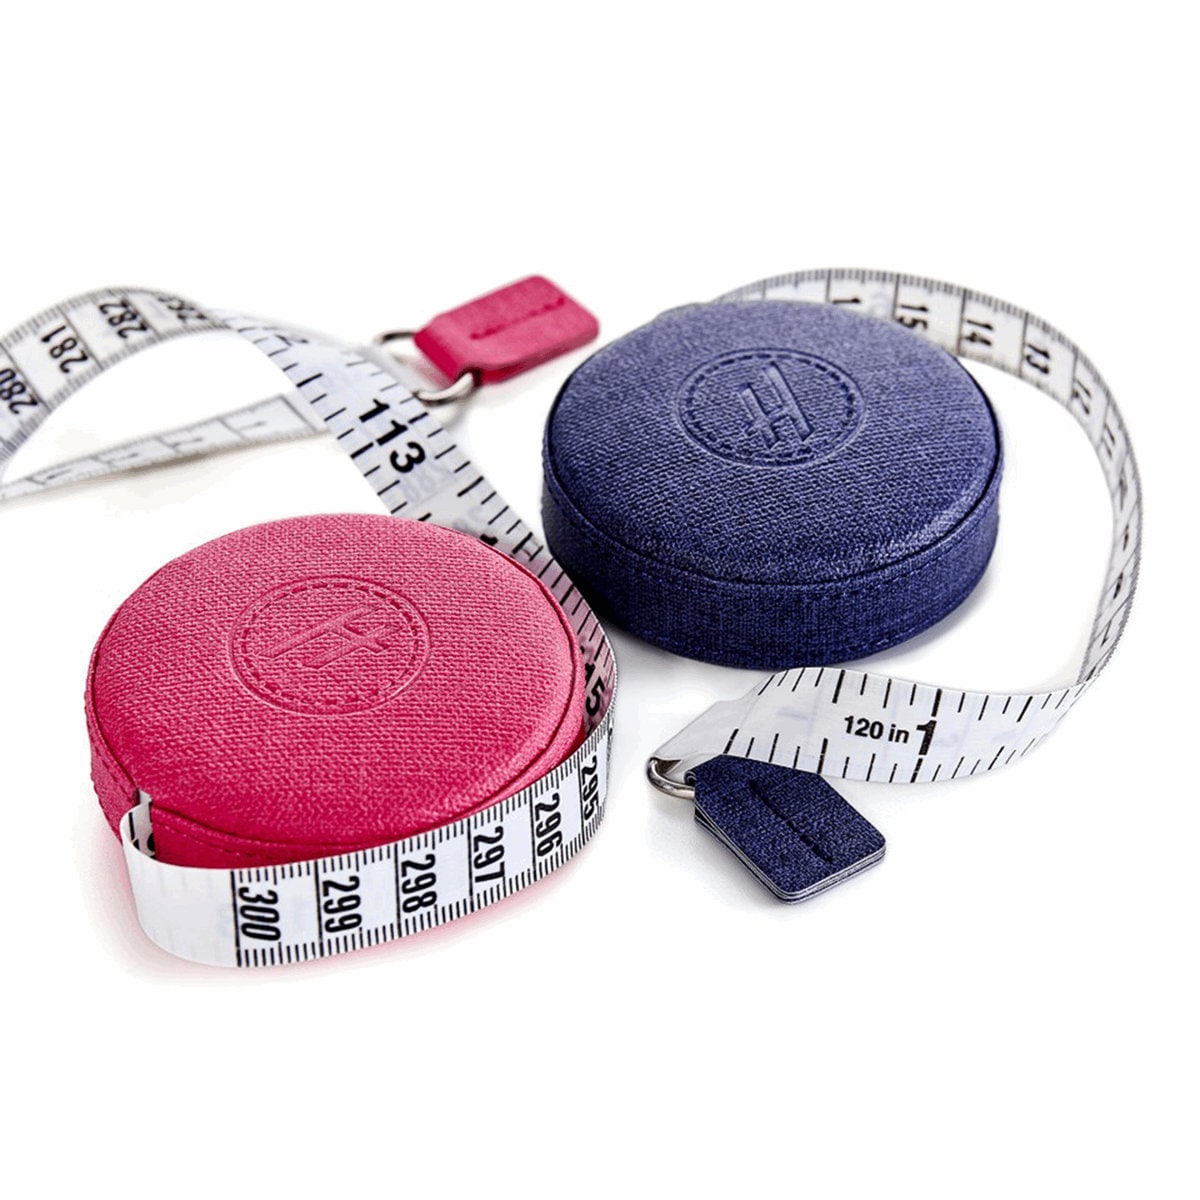 Sewing Tailors Tape Measure 60inches / 150cm Soft and flexible. Measure for  waist, height